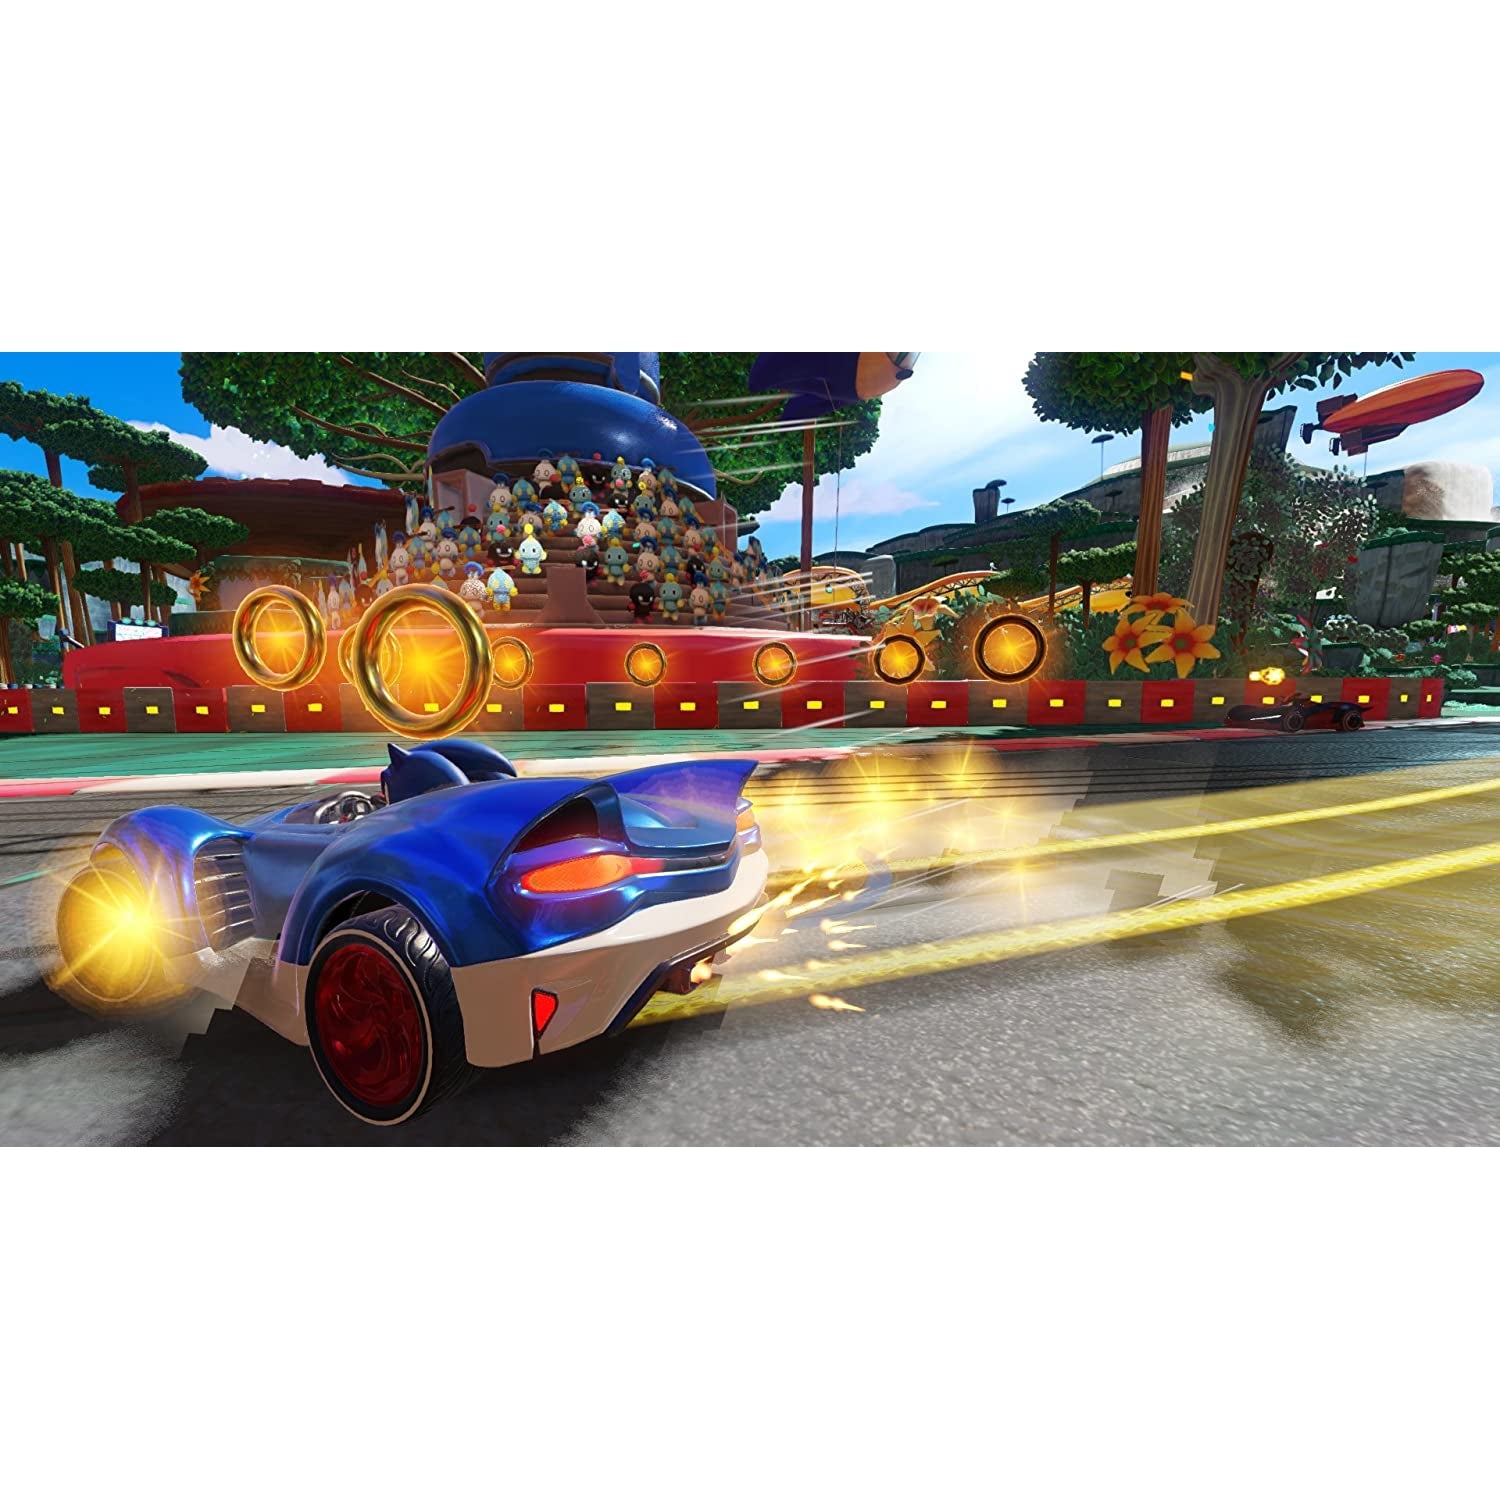 Team Sonic Racing Gift Pack (PS4)